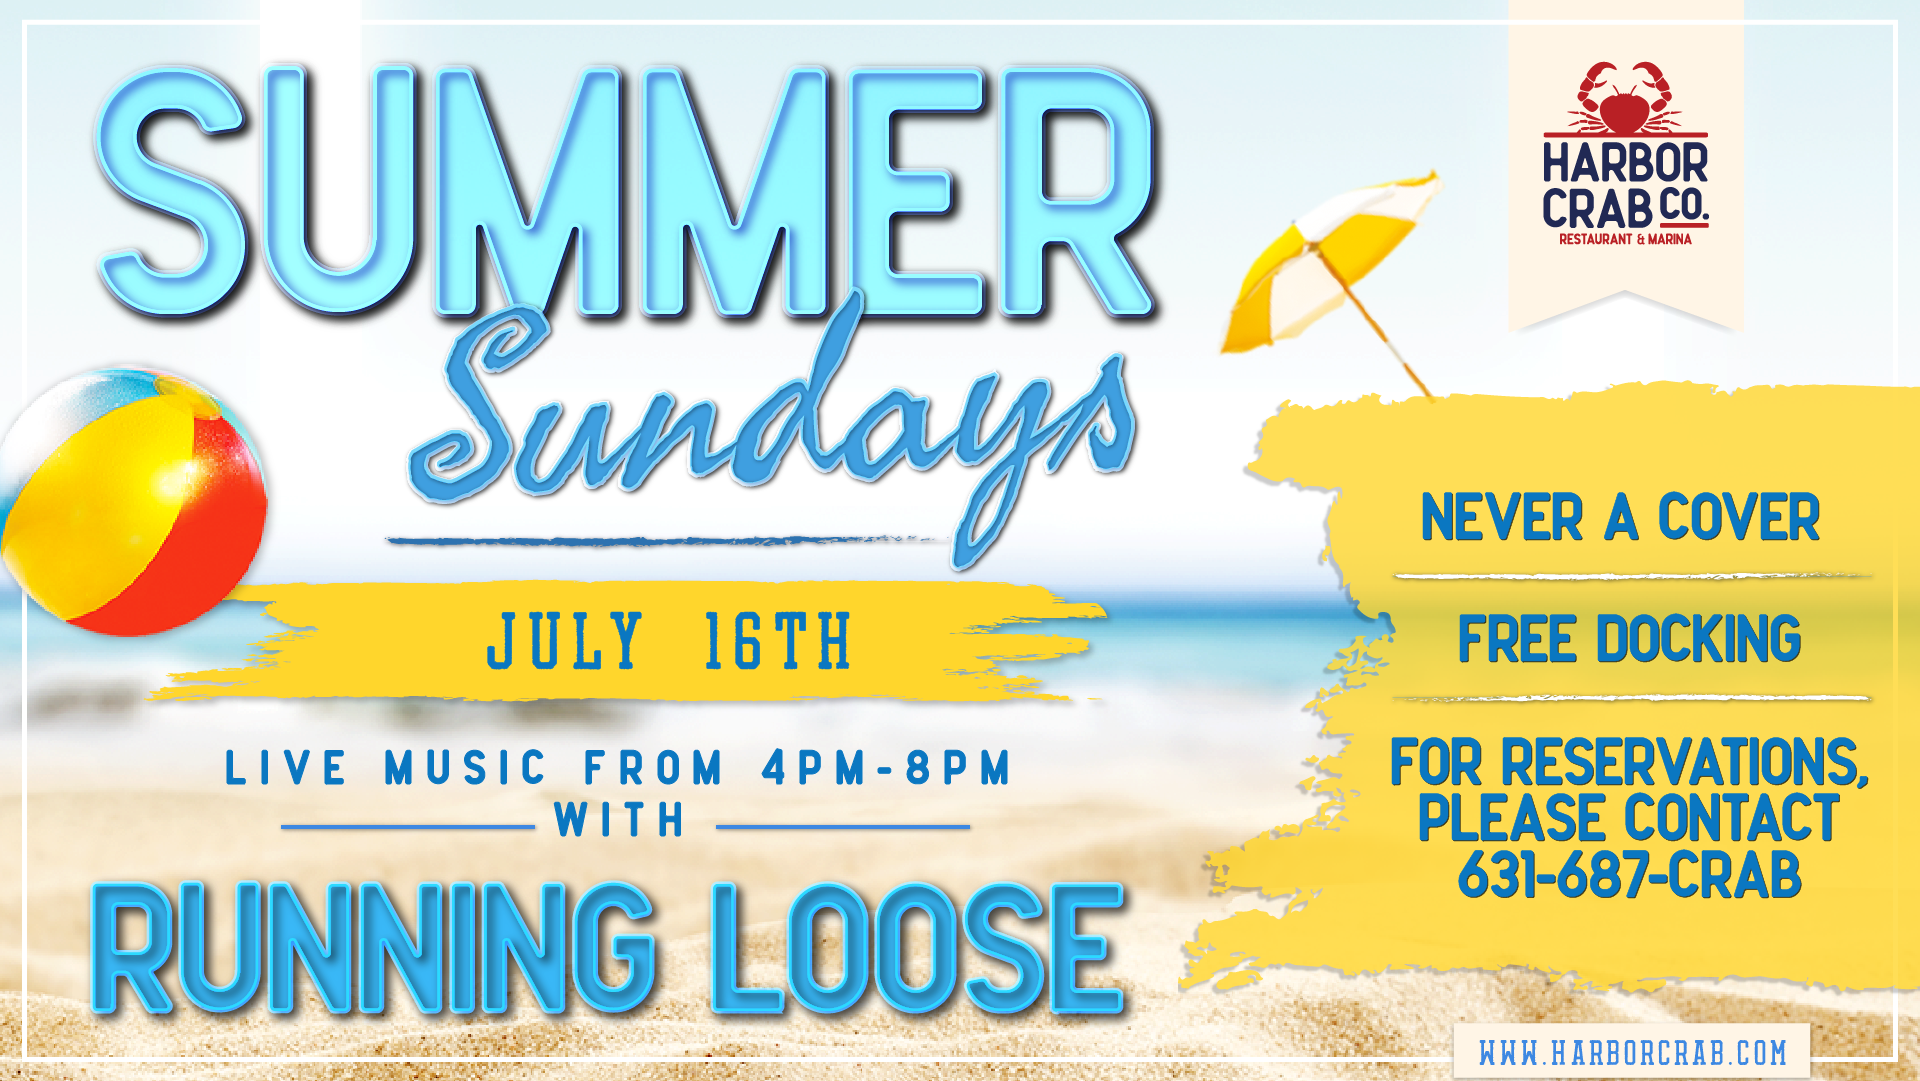 Summer Sunday with Running Loose on July 16th at 4pm